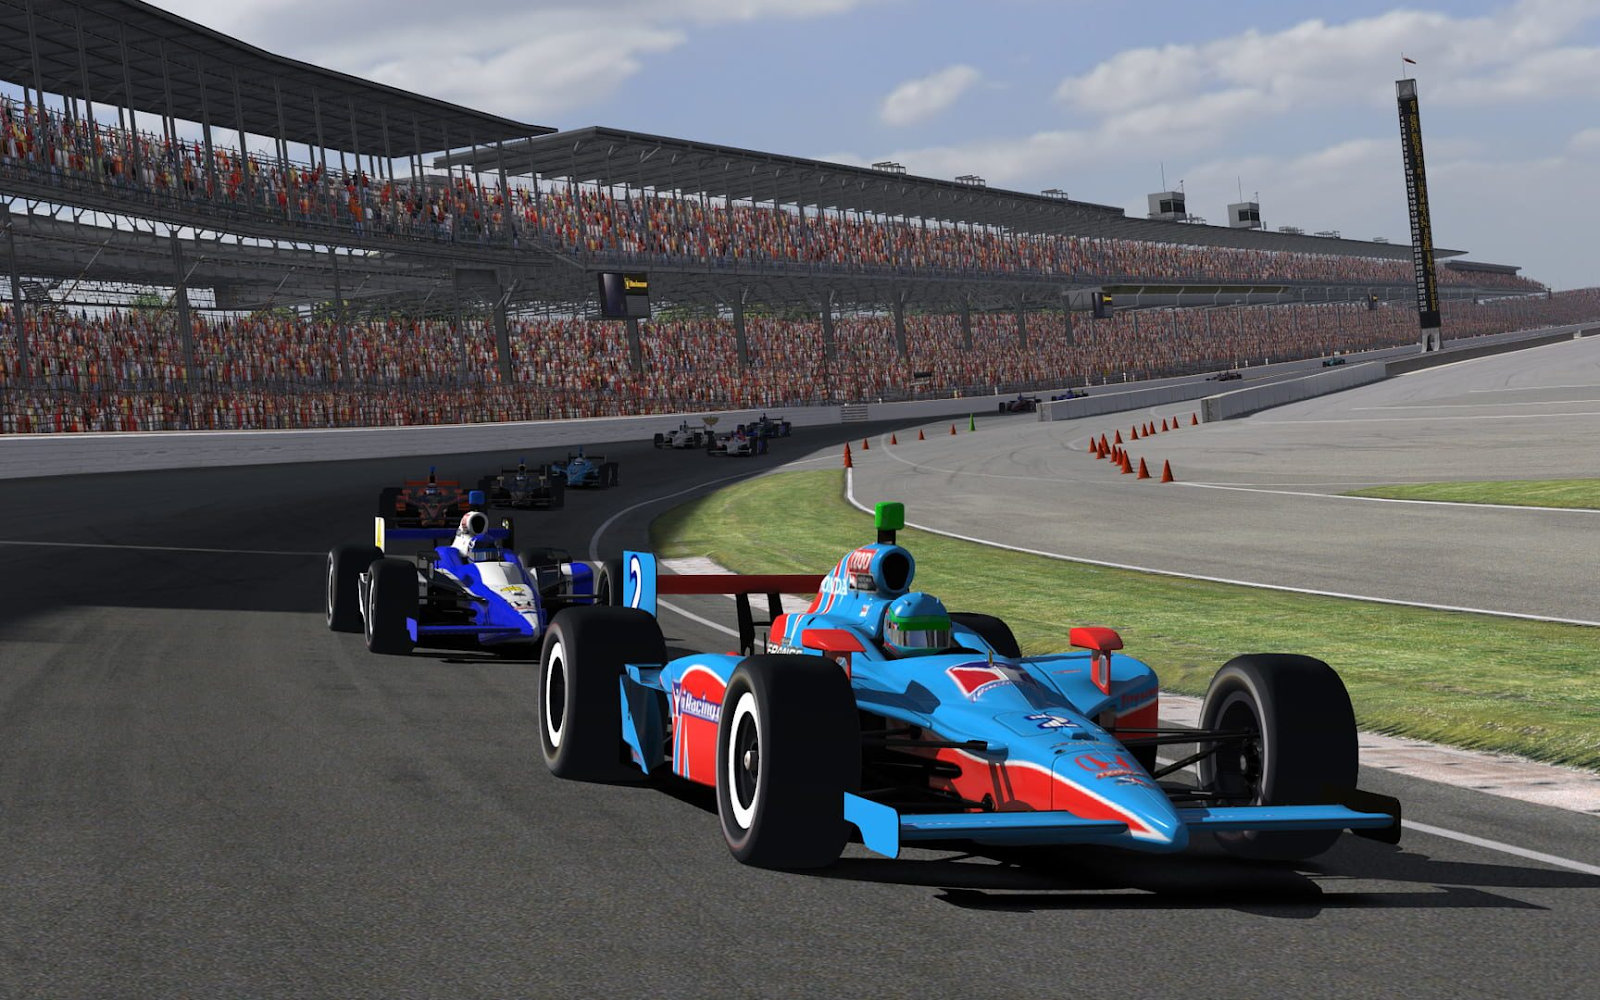 screenshot from the game iRacing showing multiple formula three cars driving together on a racing track